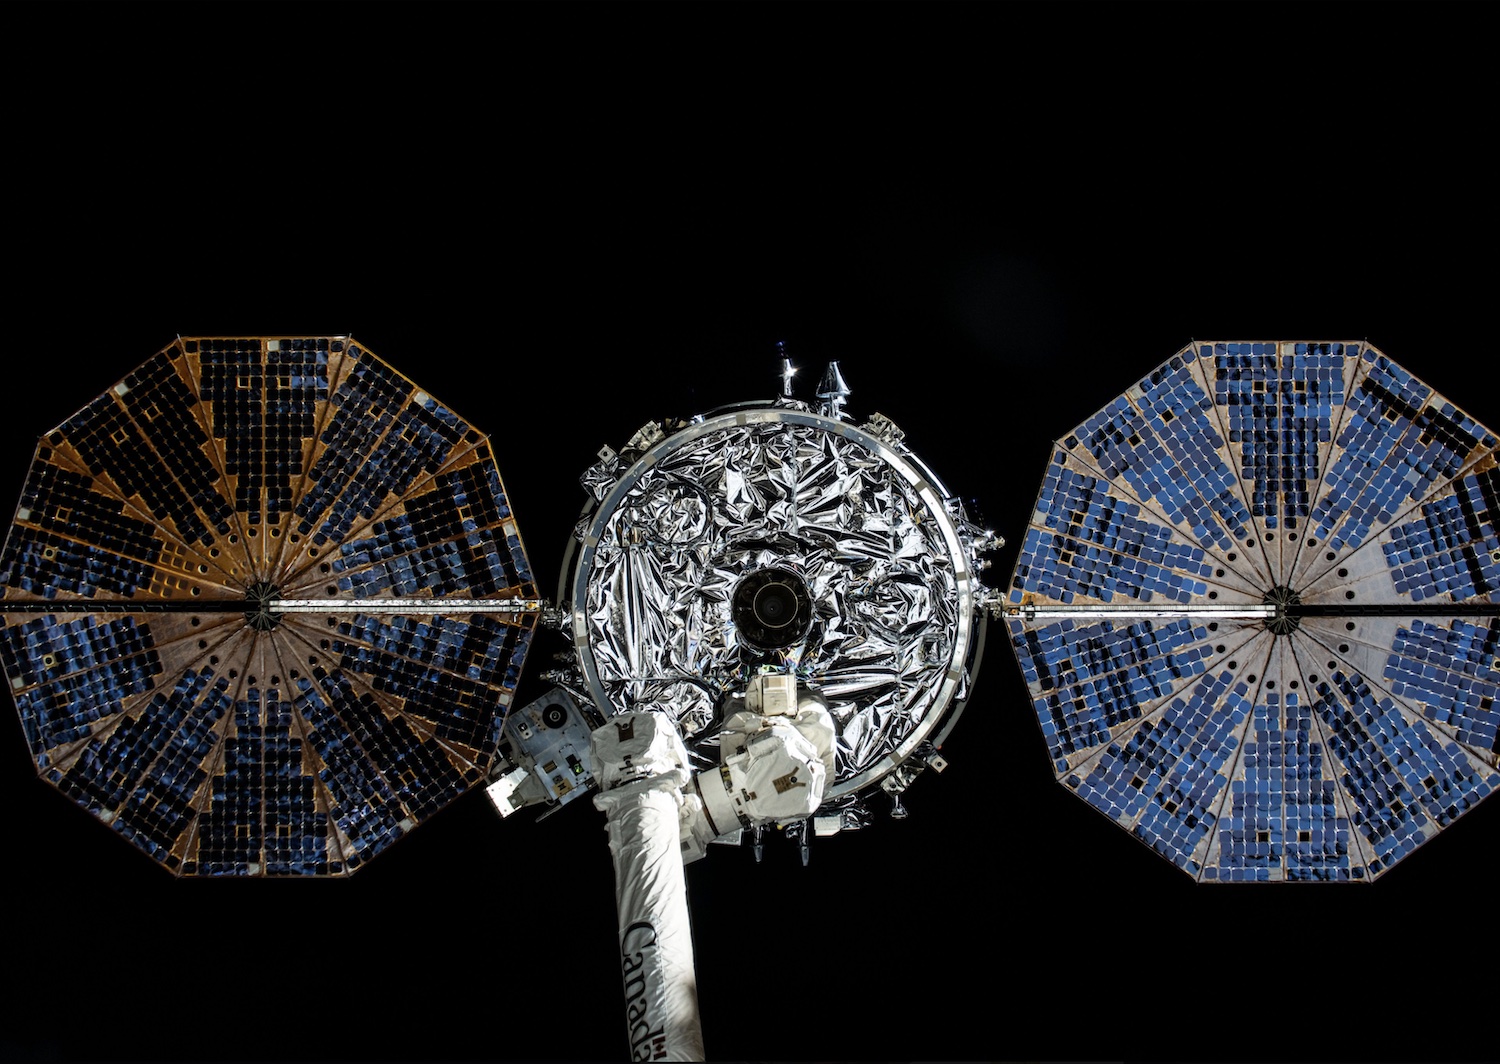 A Cygnus spacecraft at the ISS.